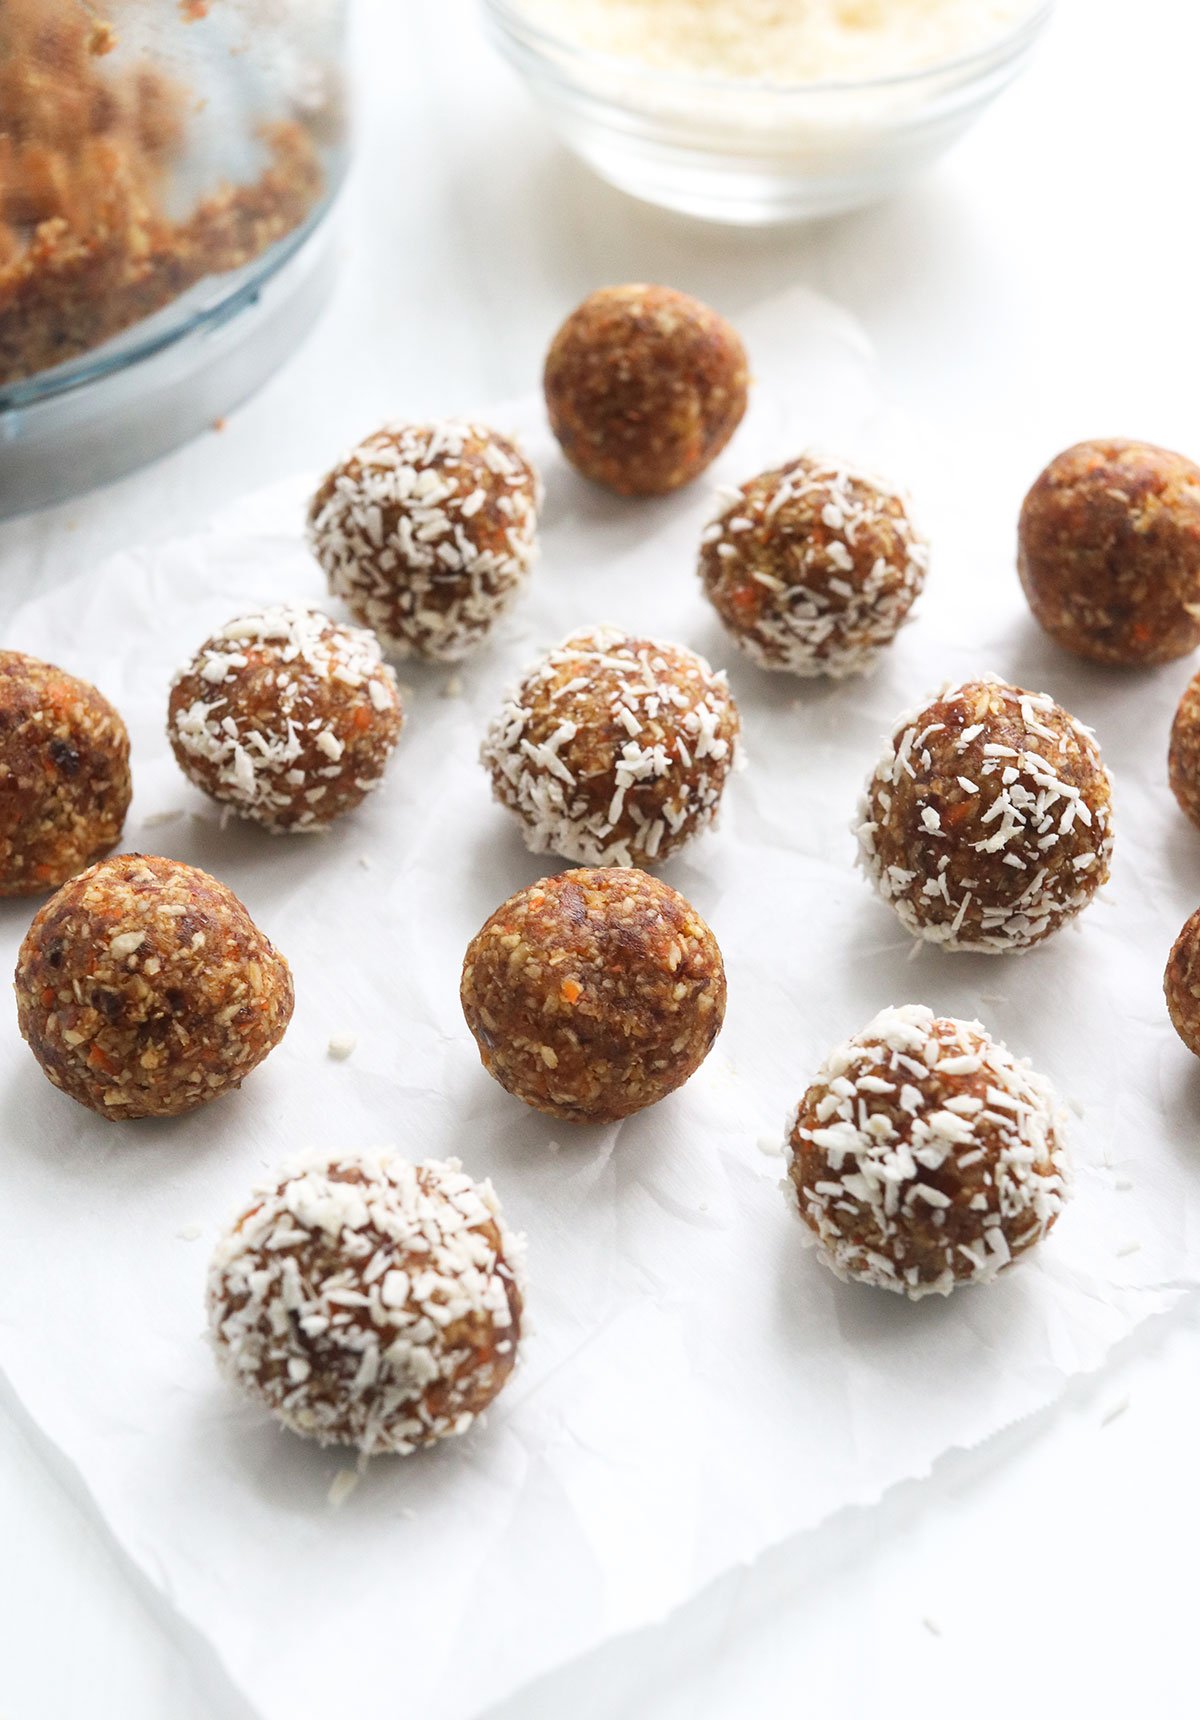 carrot cake balls arranged on parchment paper.